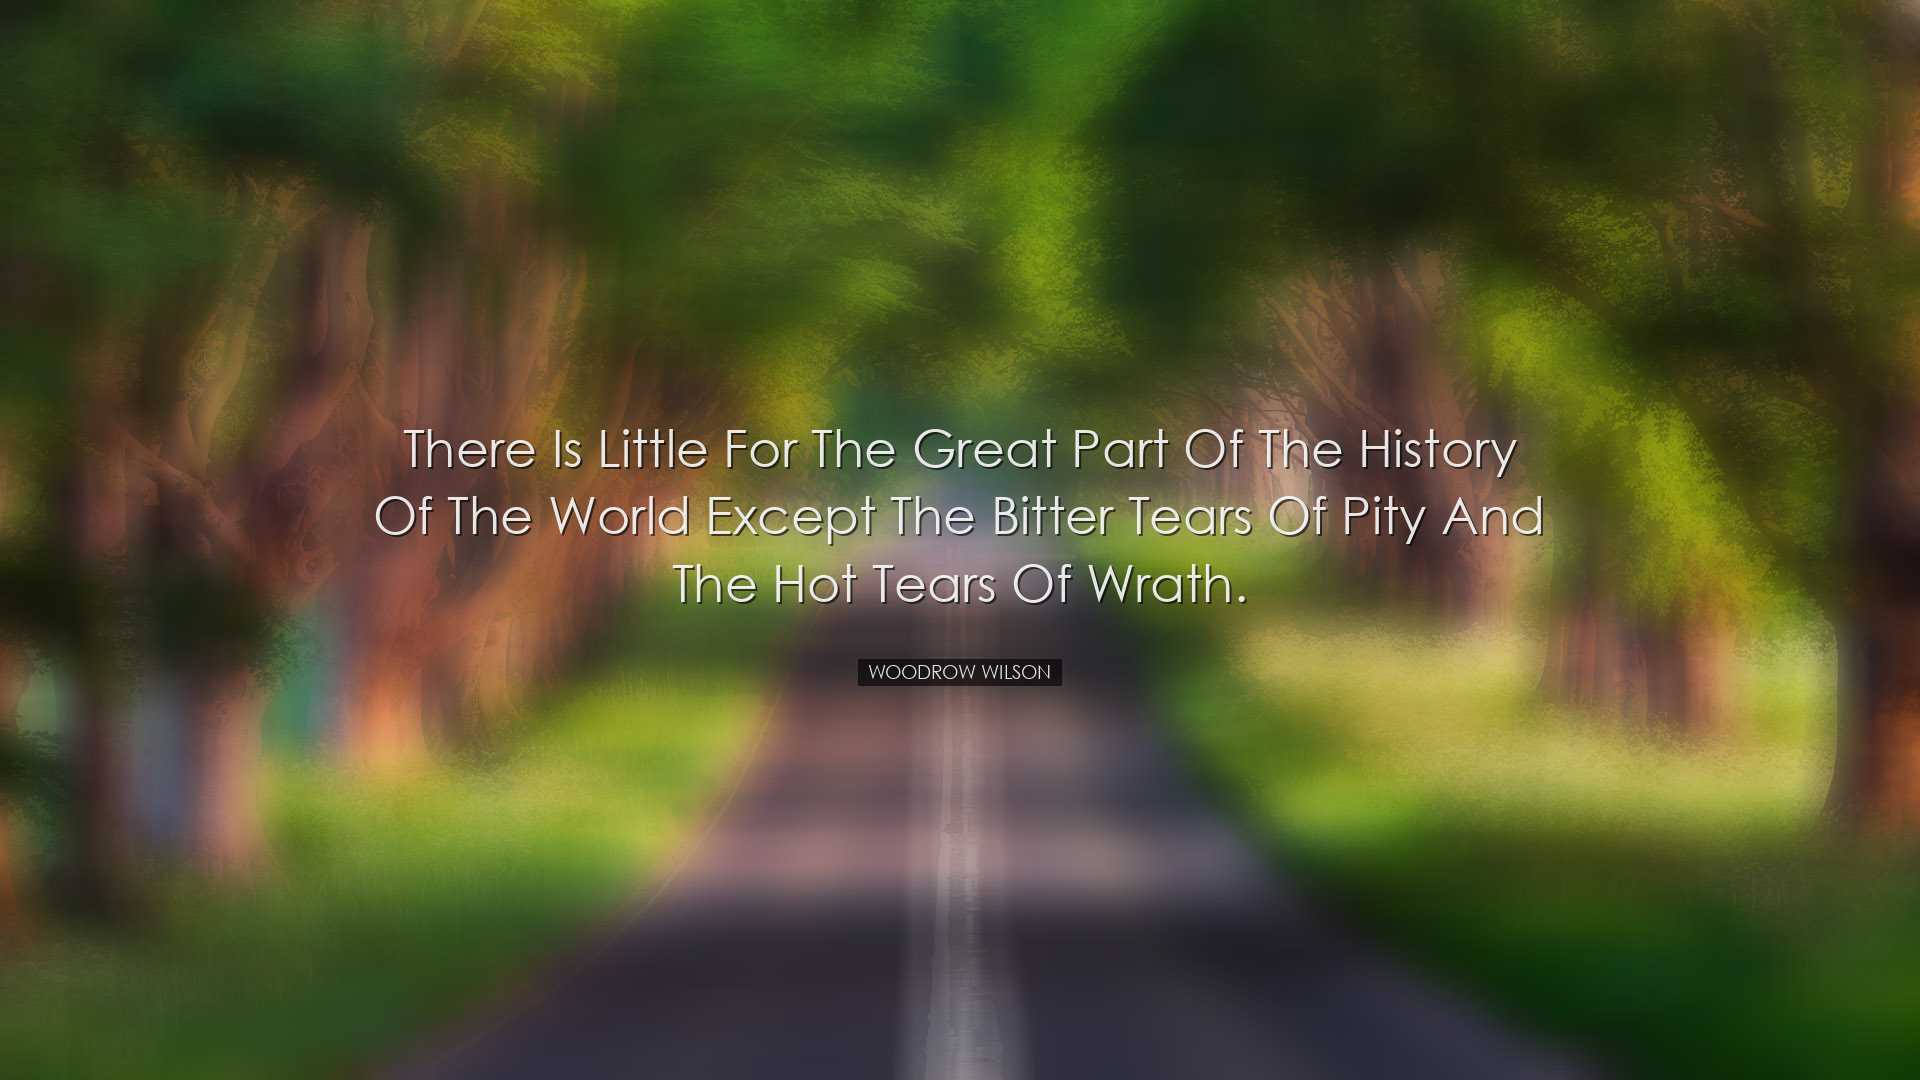 There is little for the great part of the history of the world exc